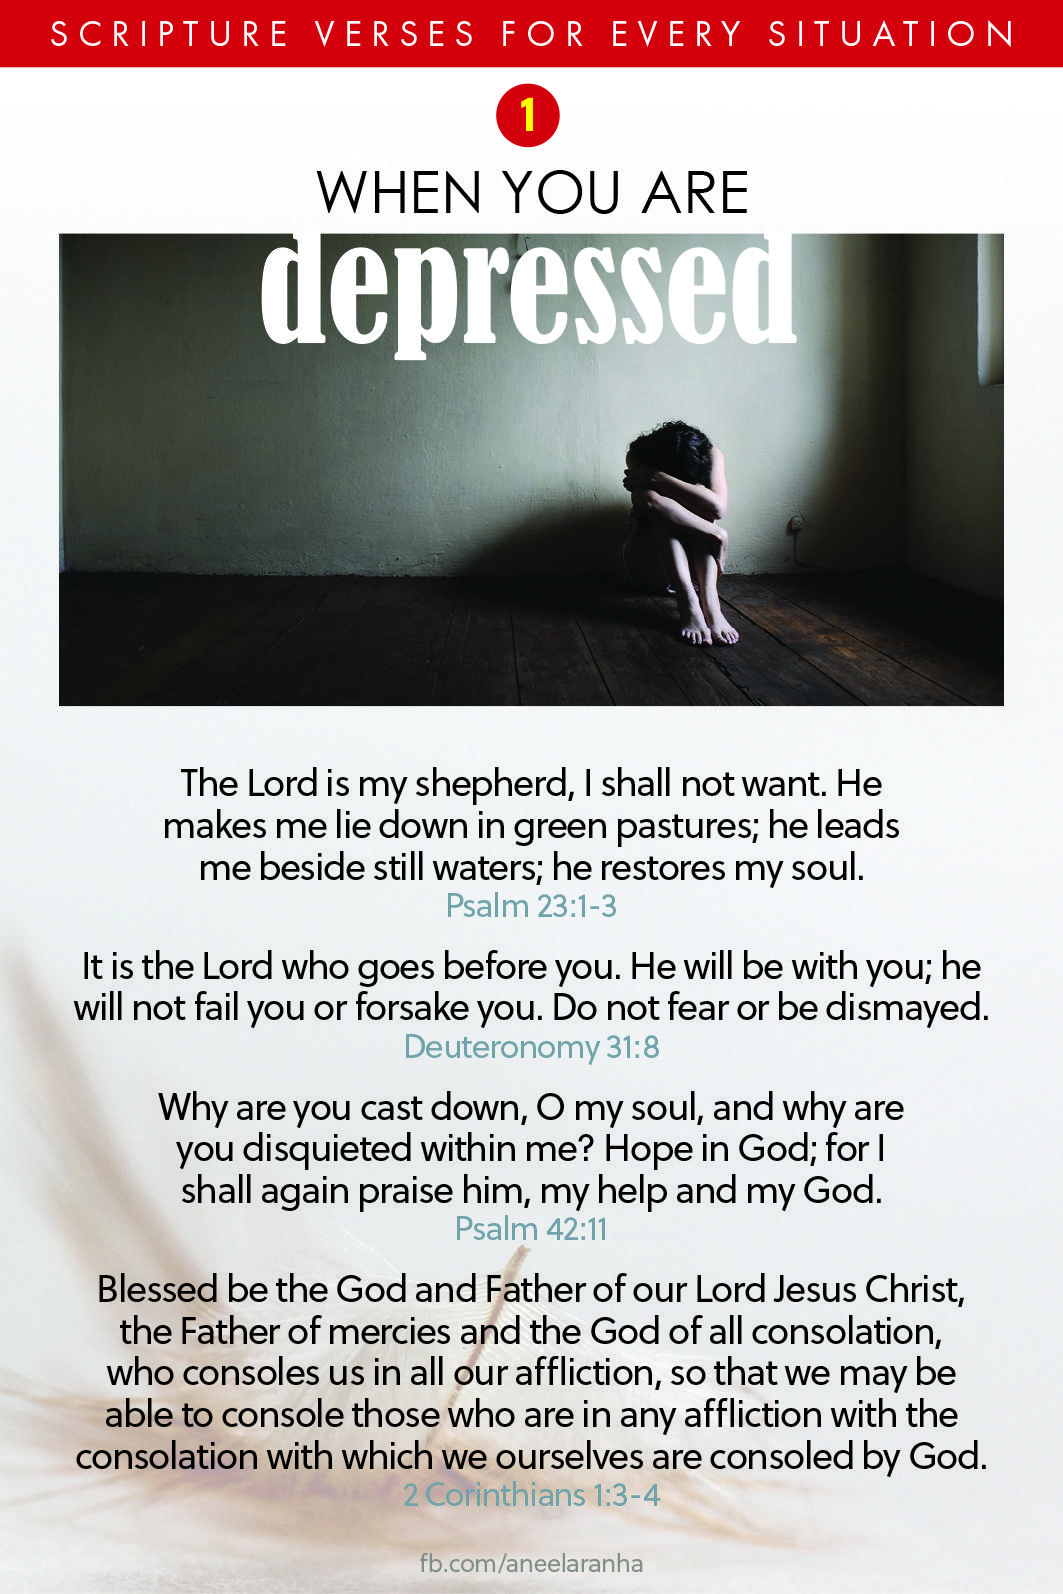 01. Are you depressed?